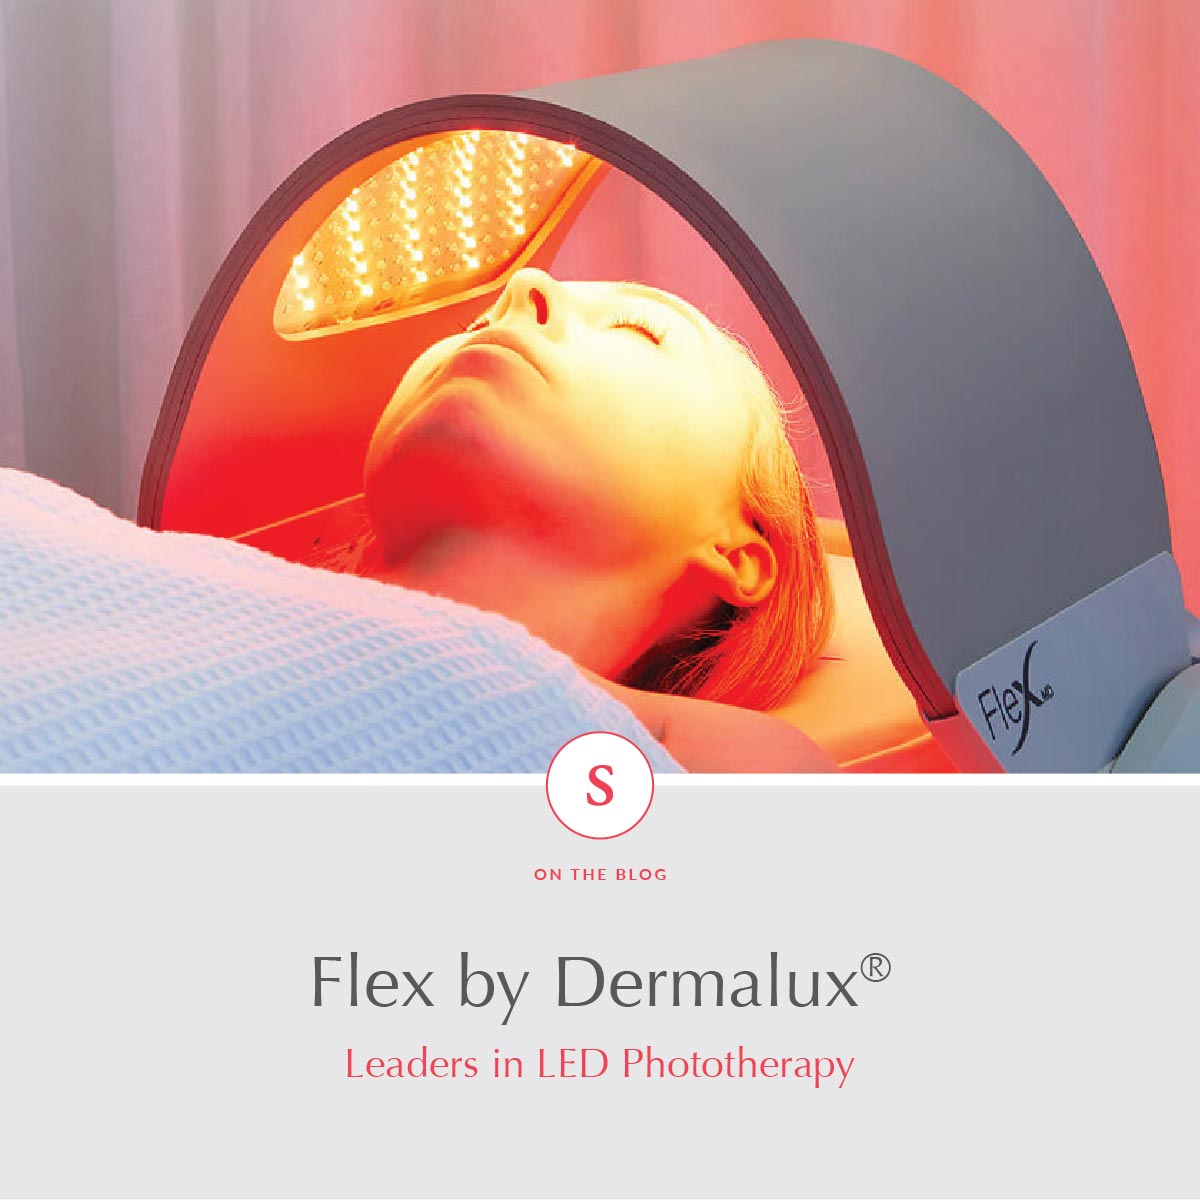 Flex by Dermalux® – Leaders in LED Phototherapy